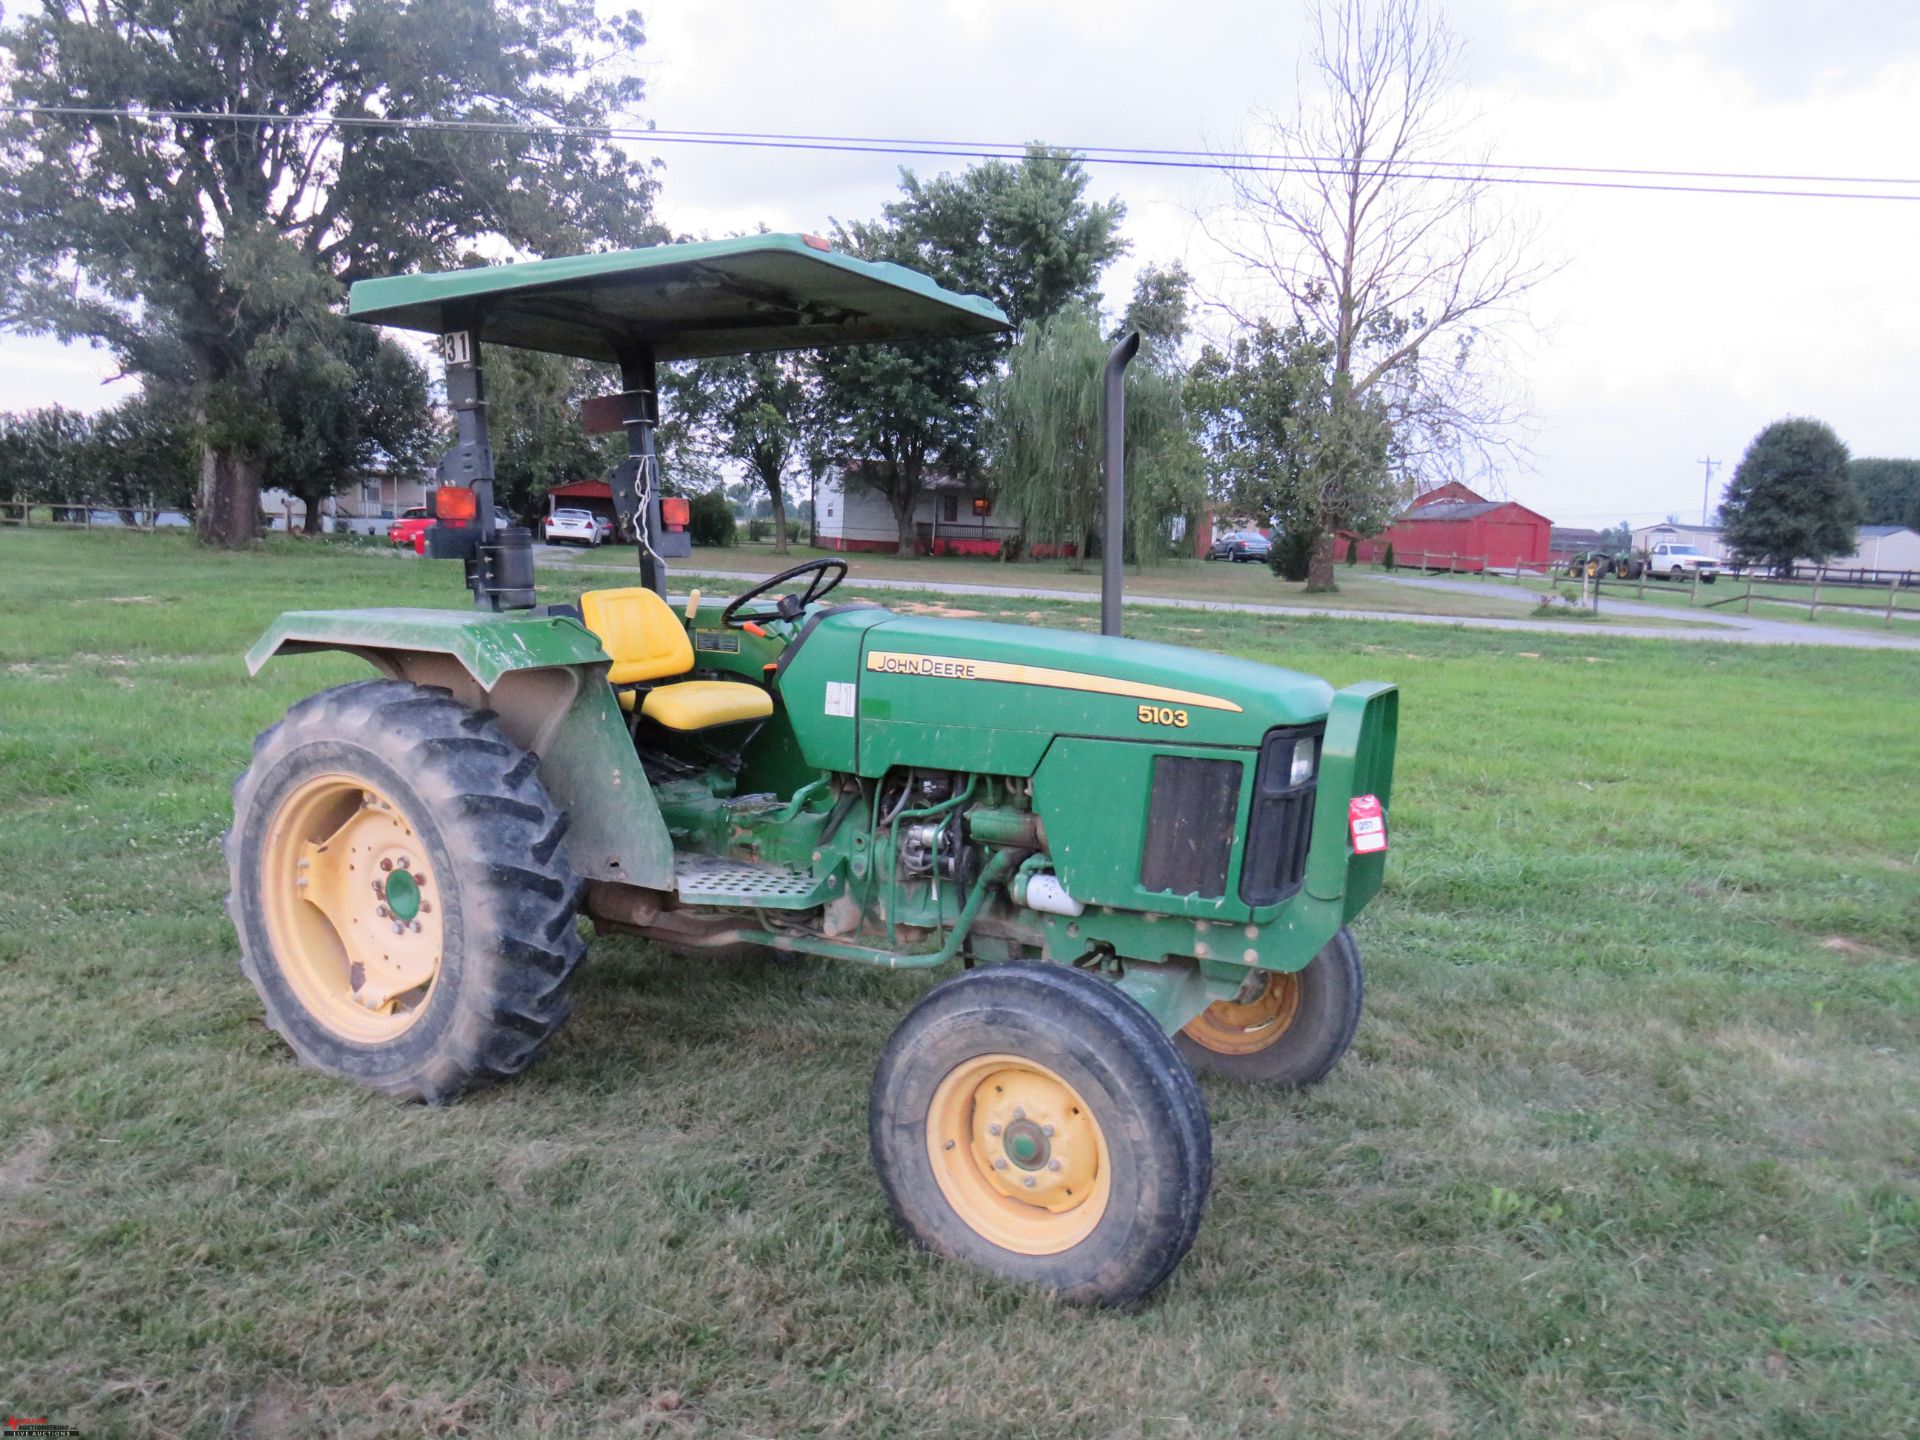 2007 JOHN DEERE 5103 TRACTOR WITH CANOPY, PTO, NO 3PT, 13.6-28 REAR TIRES, 11036 HOURS SHOWING ( - Image 2 of 8